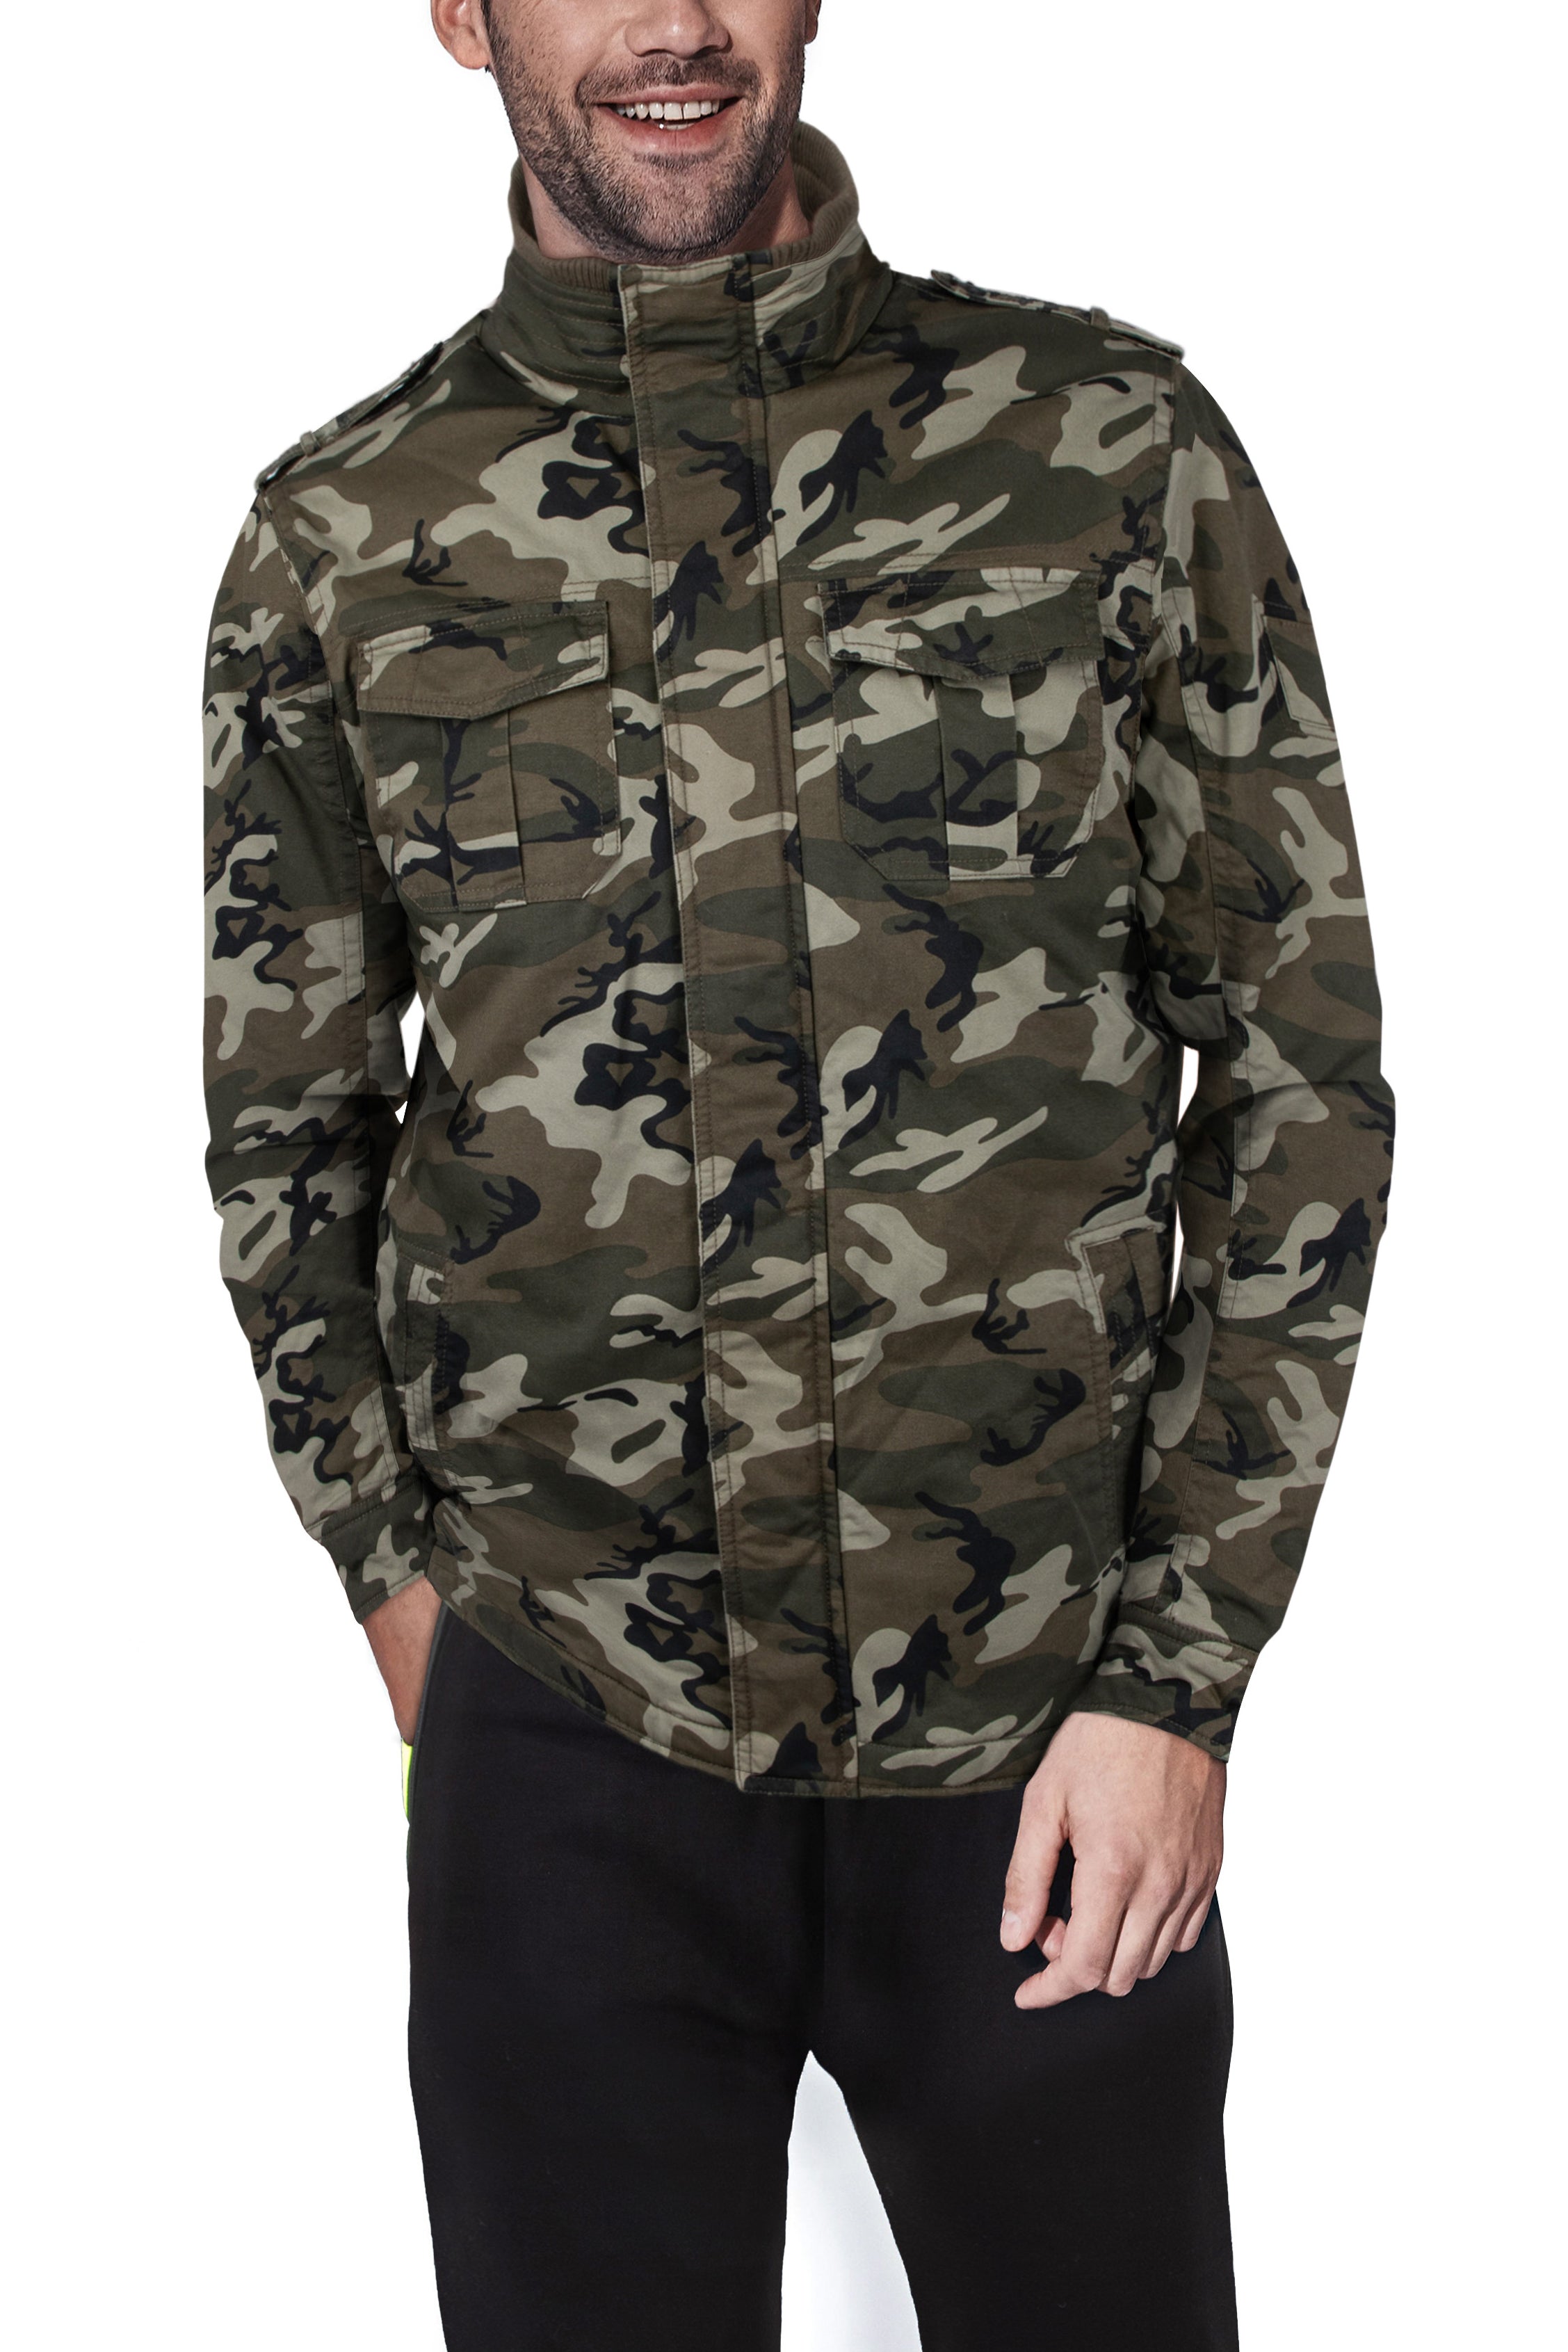 XRay Jeans Lightweight Military Field Jacket – X-RAY JEANS